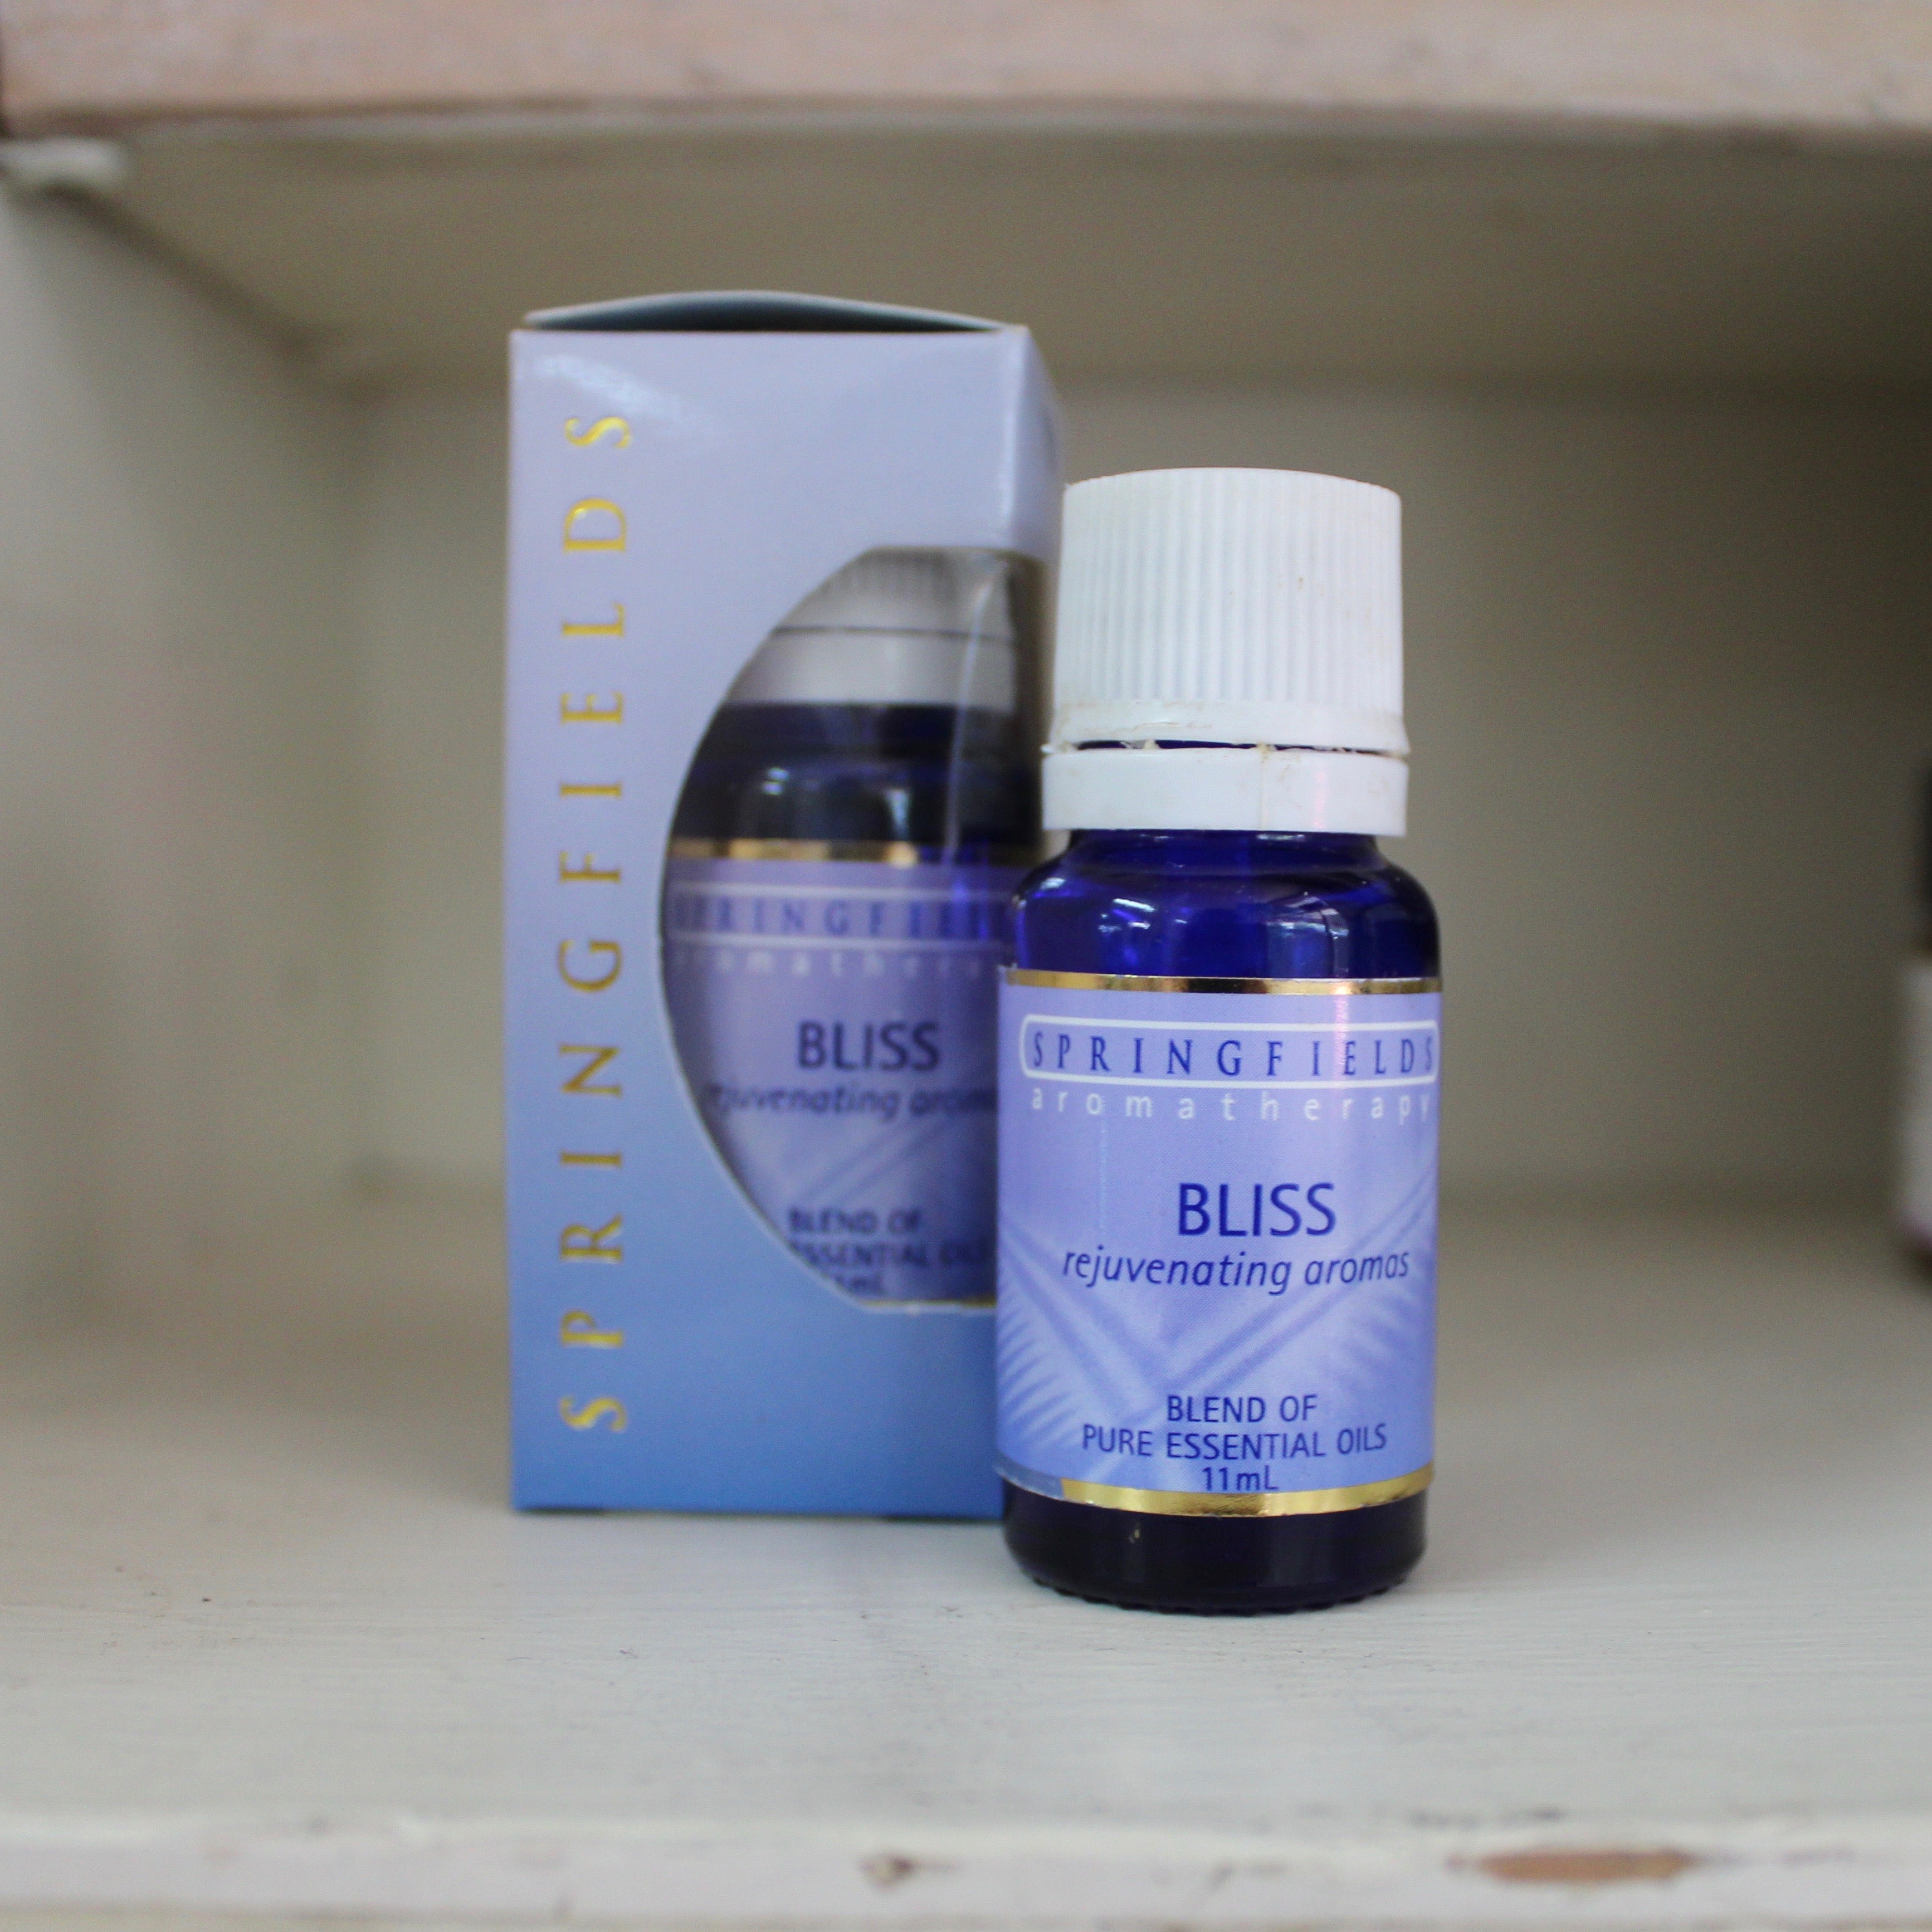 Springfields Bliss 11ml Blend of Pure Essential Oils